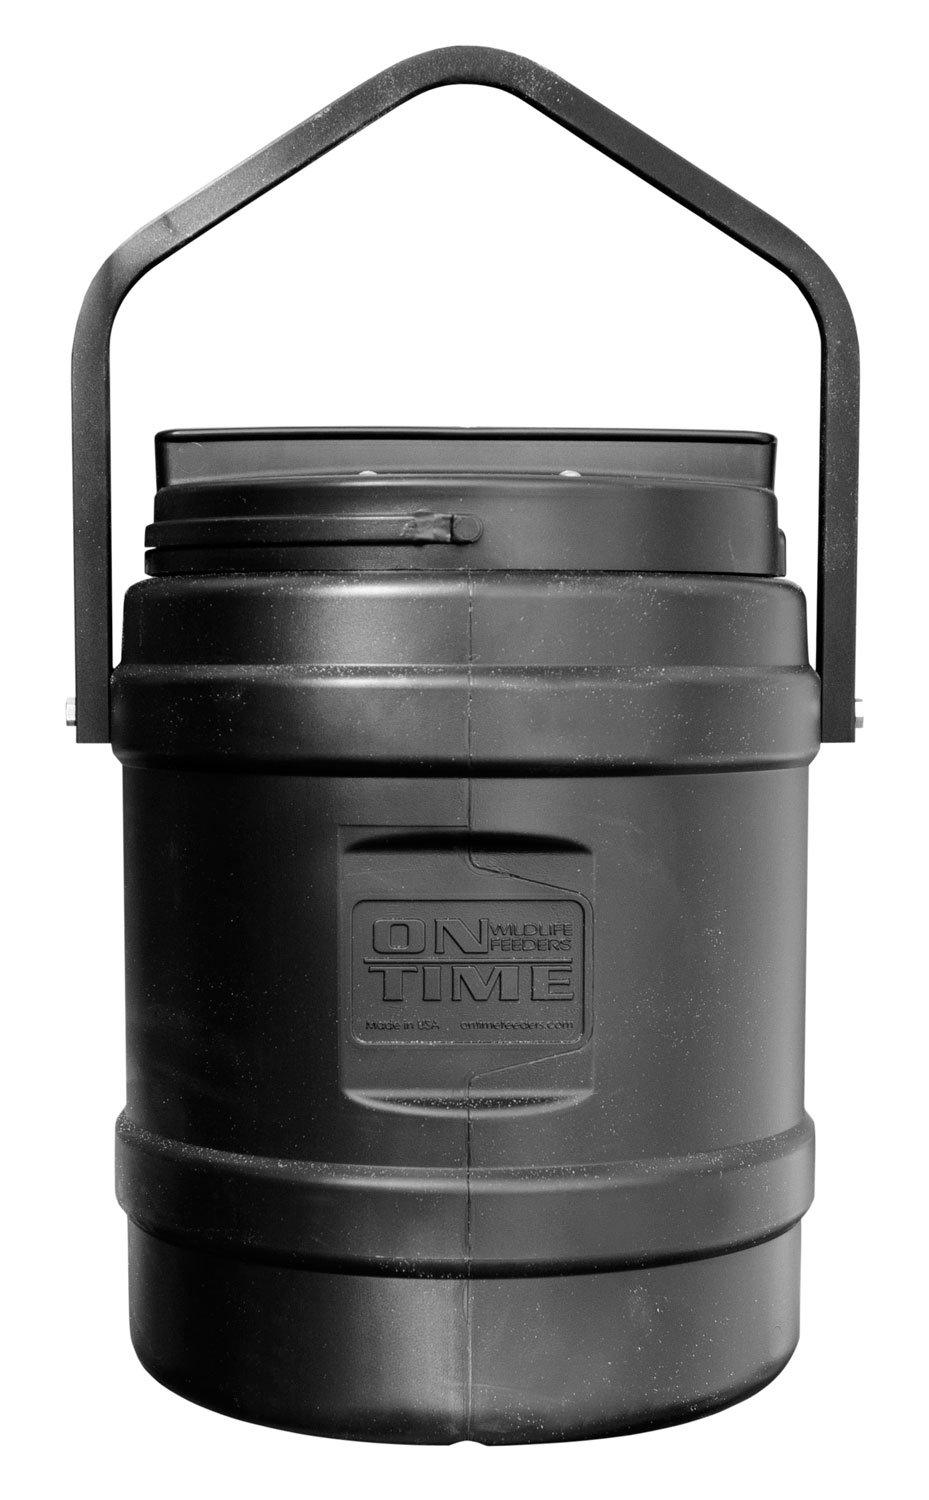 On Time 73000 Rice Bran Feeder made of Plastic with Black Finish, 10 Gallon Capacity, Hanging Bracket & 1-6 Feeding Times with 1-30 Duration